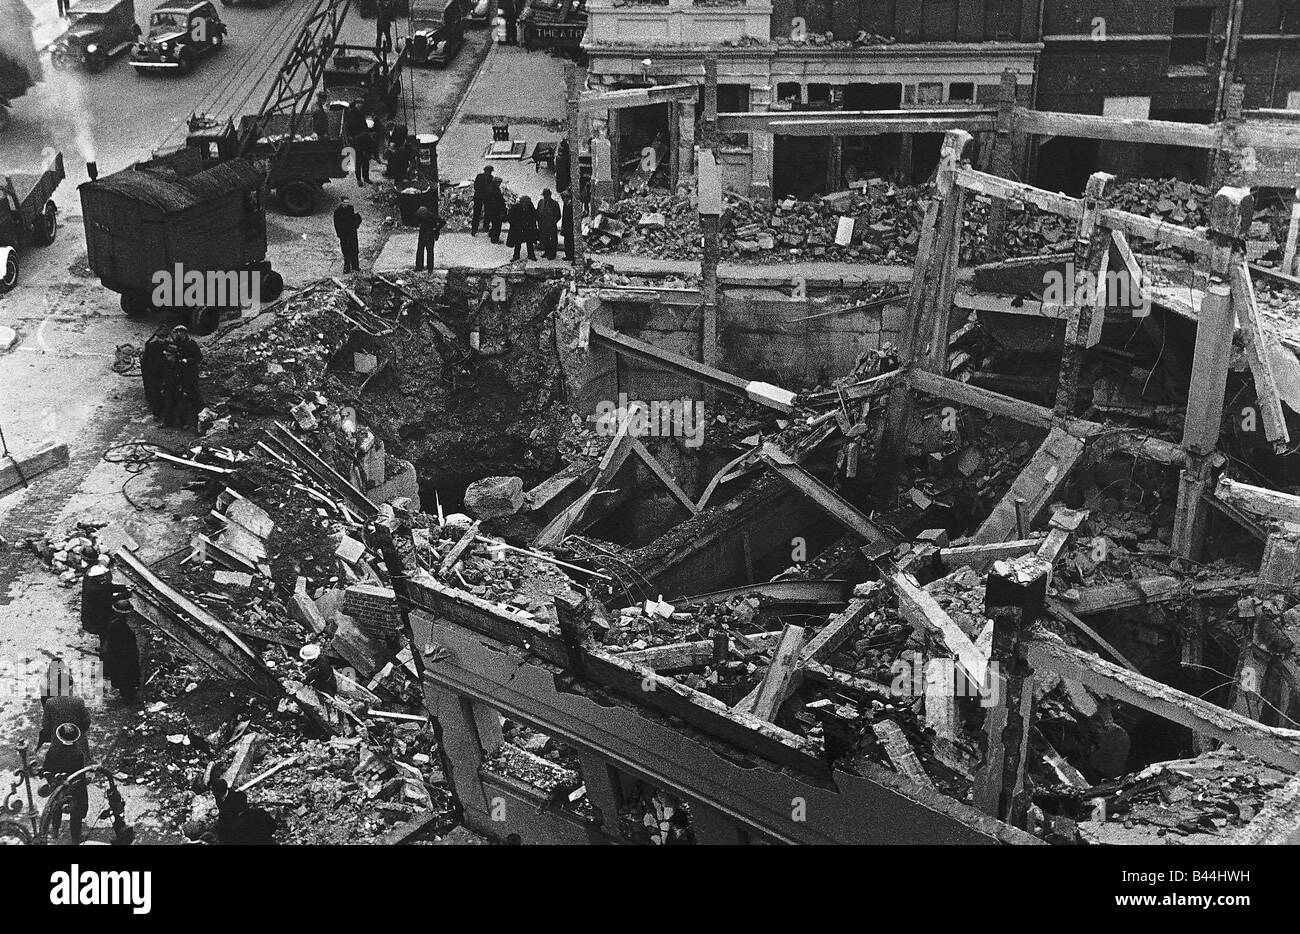 Workmen and rescue services work on the remains of Sloane Square Underground Station in London which was bombed during WW2 Stock Photo